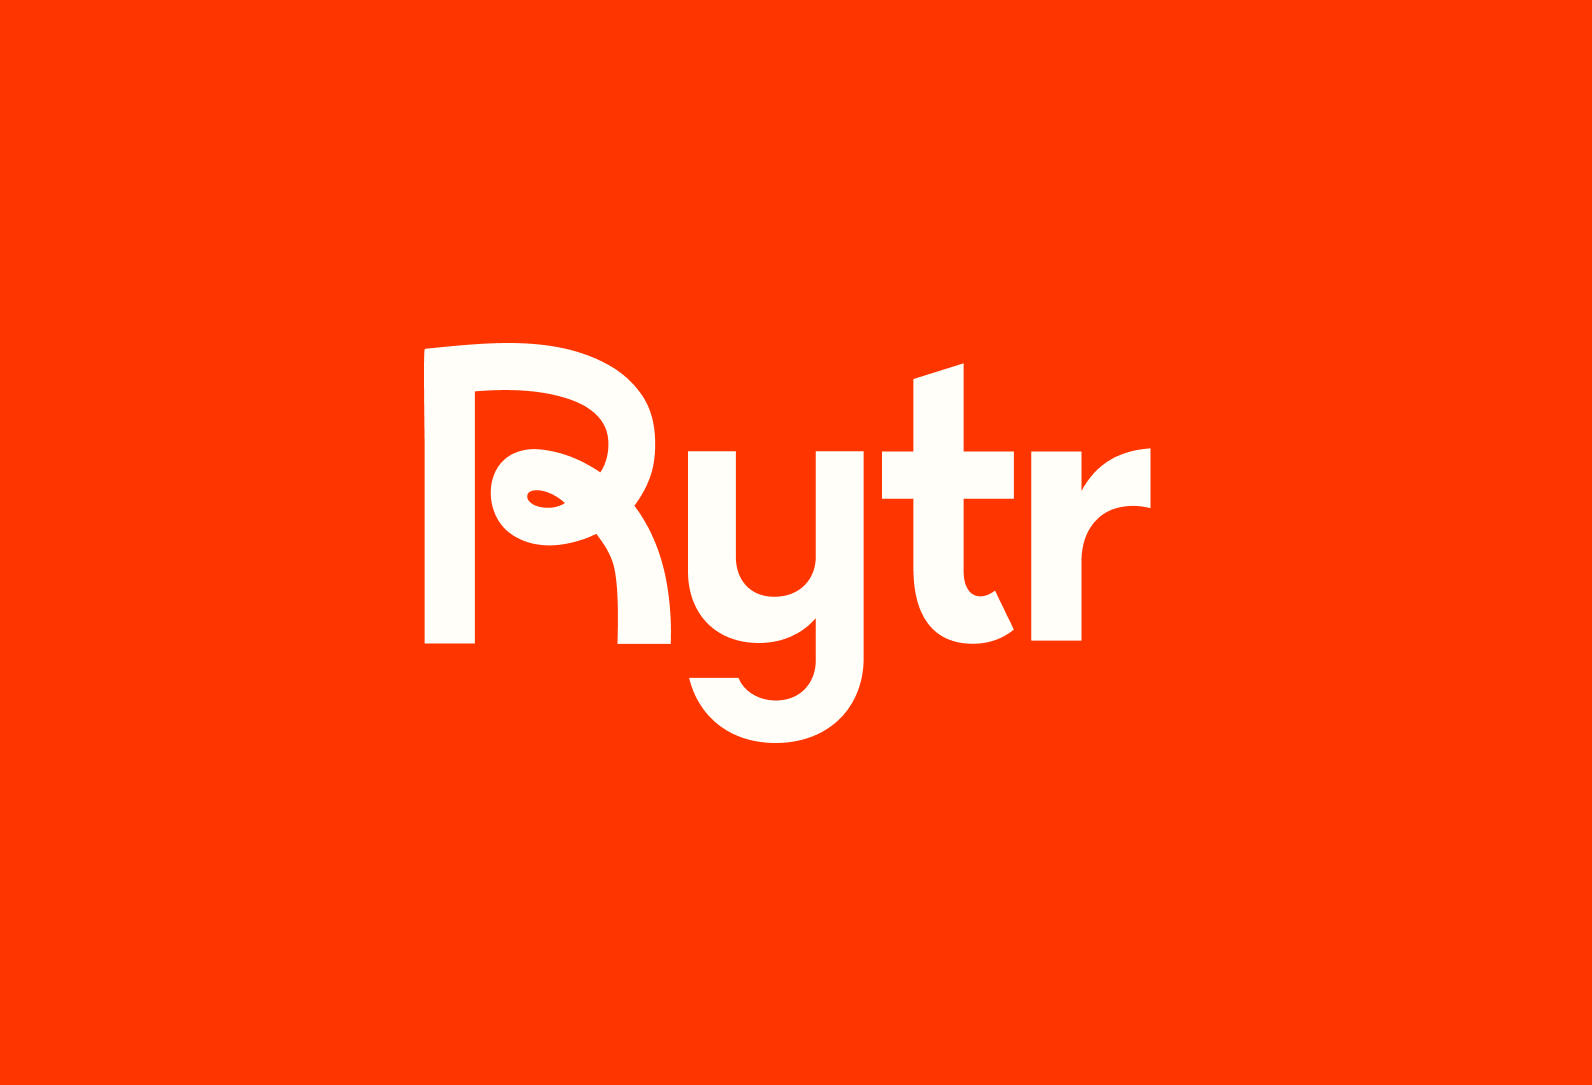 Image shows a logo for Rytr